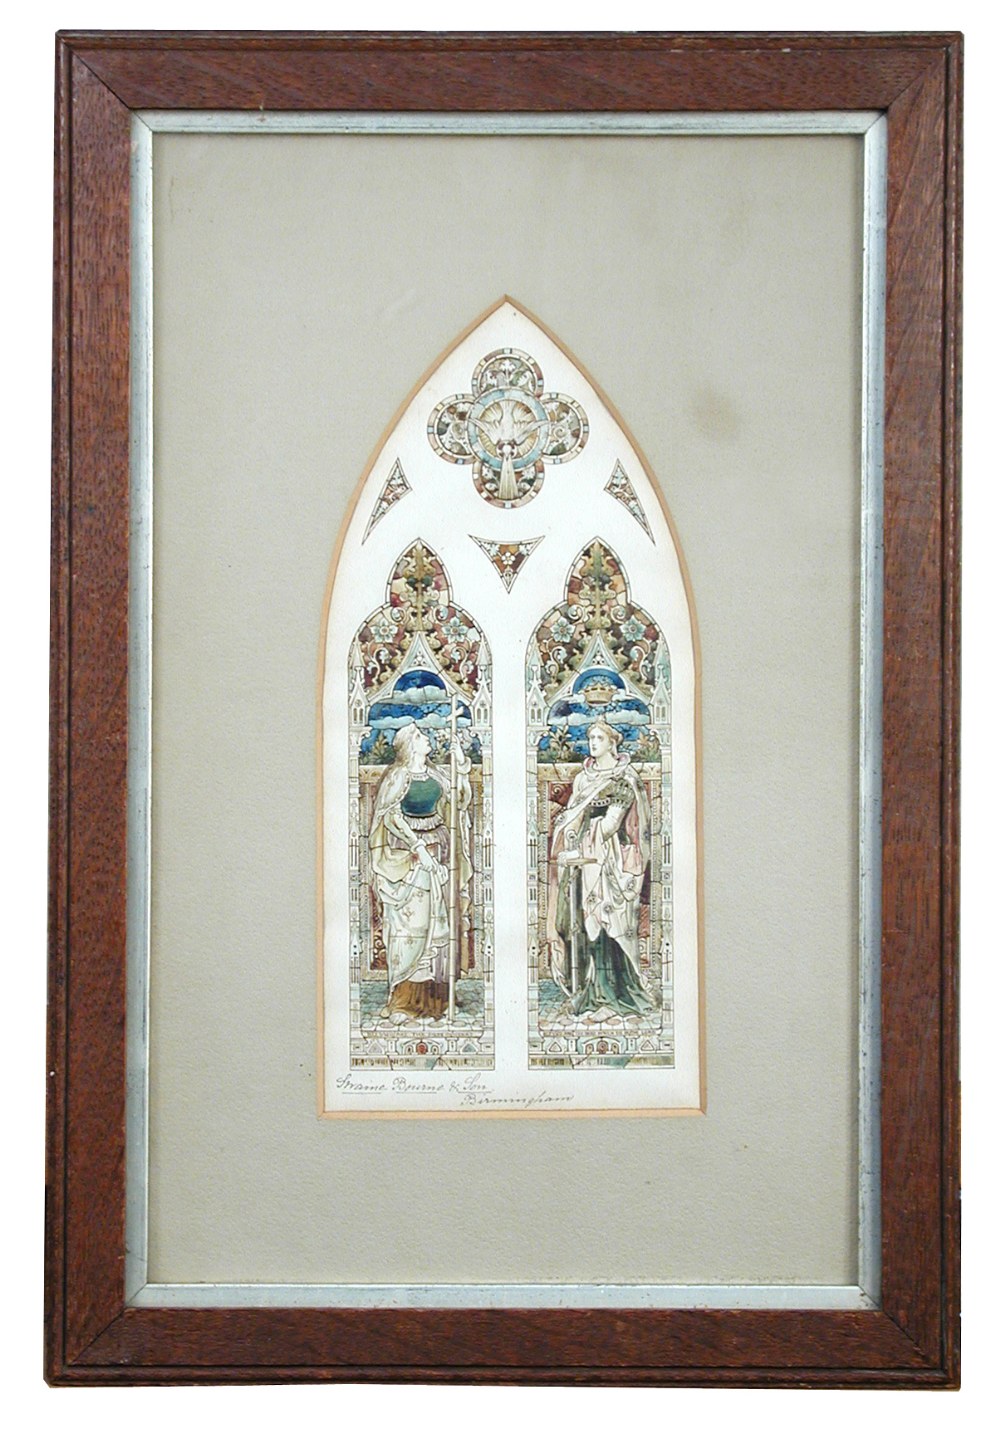 Swaine Bourne and Son, Birmingham, a design for a stained glass window, within an arched mount, each